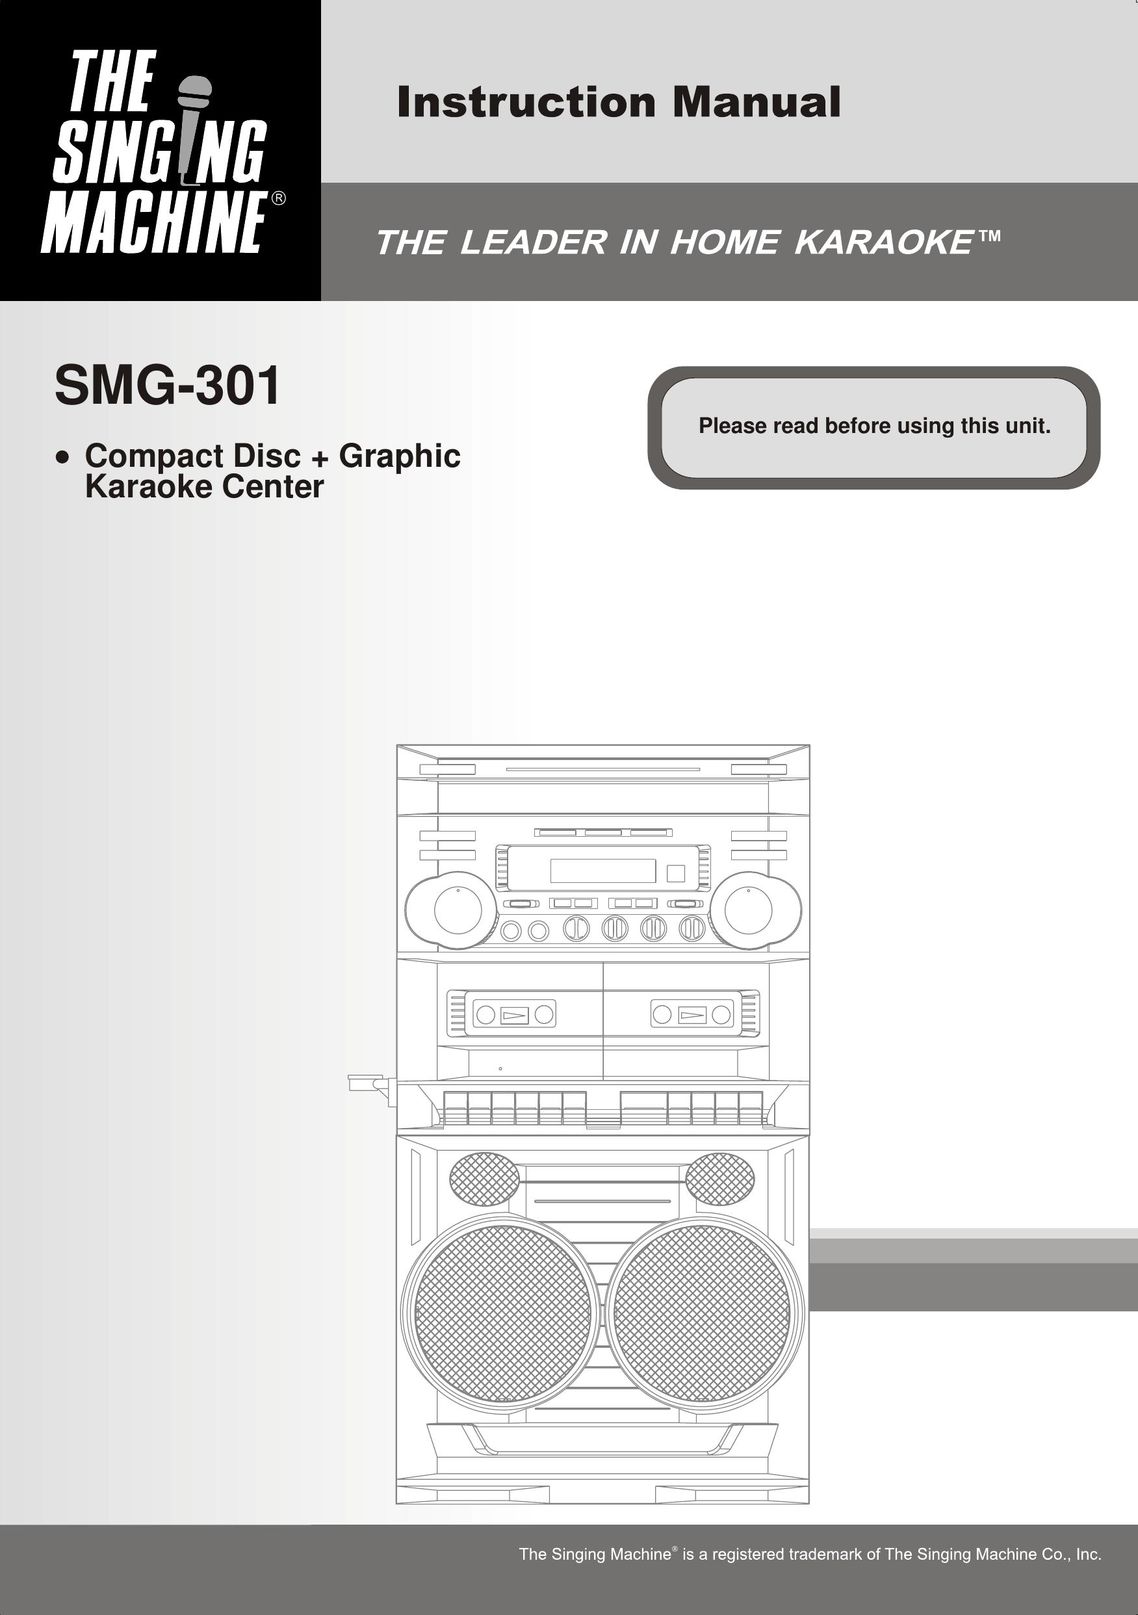 The Singing Machine SMG-301 CD Player User Manual